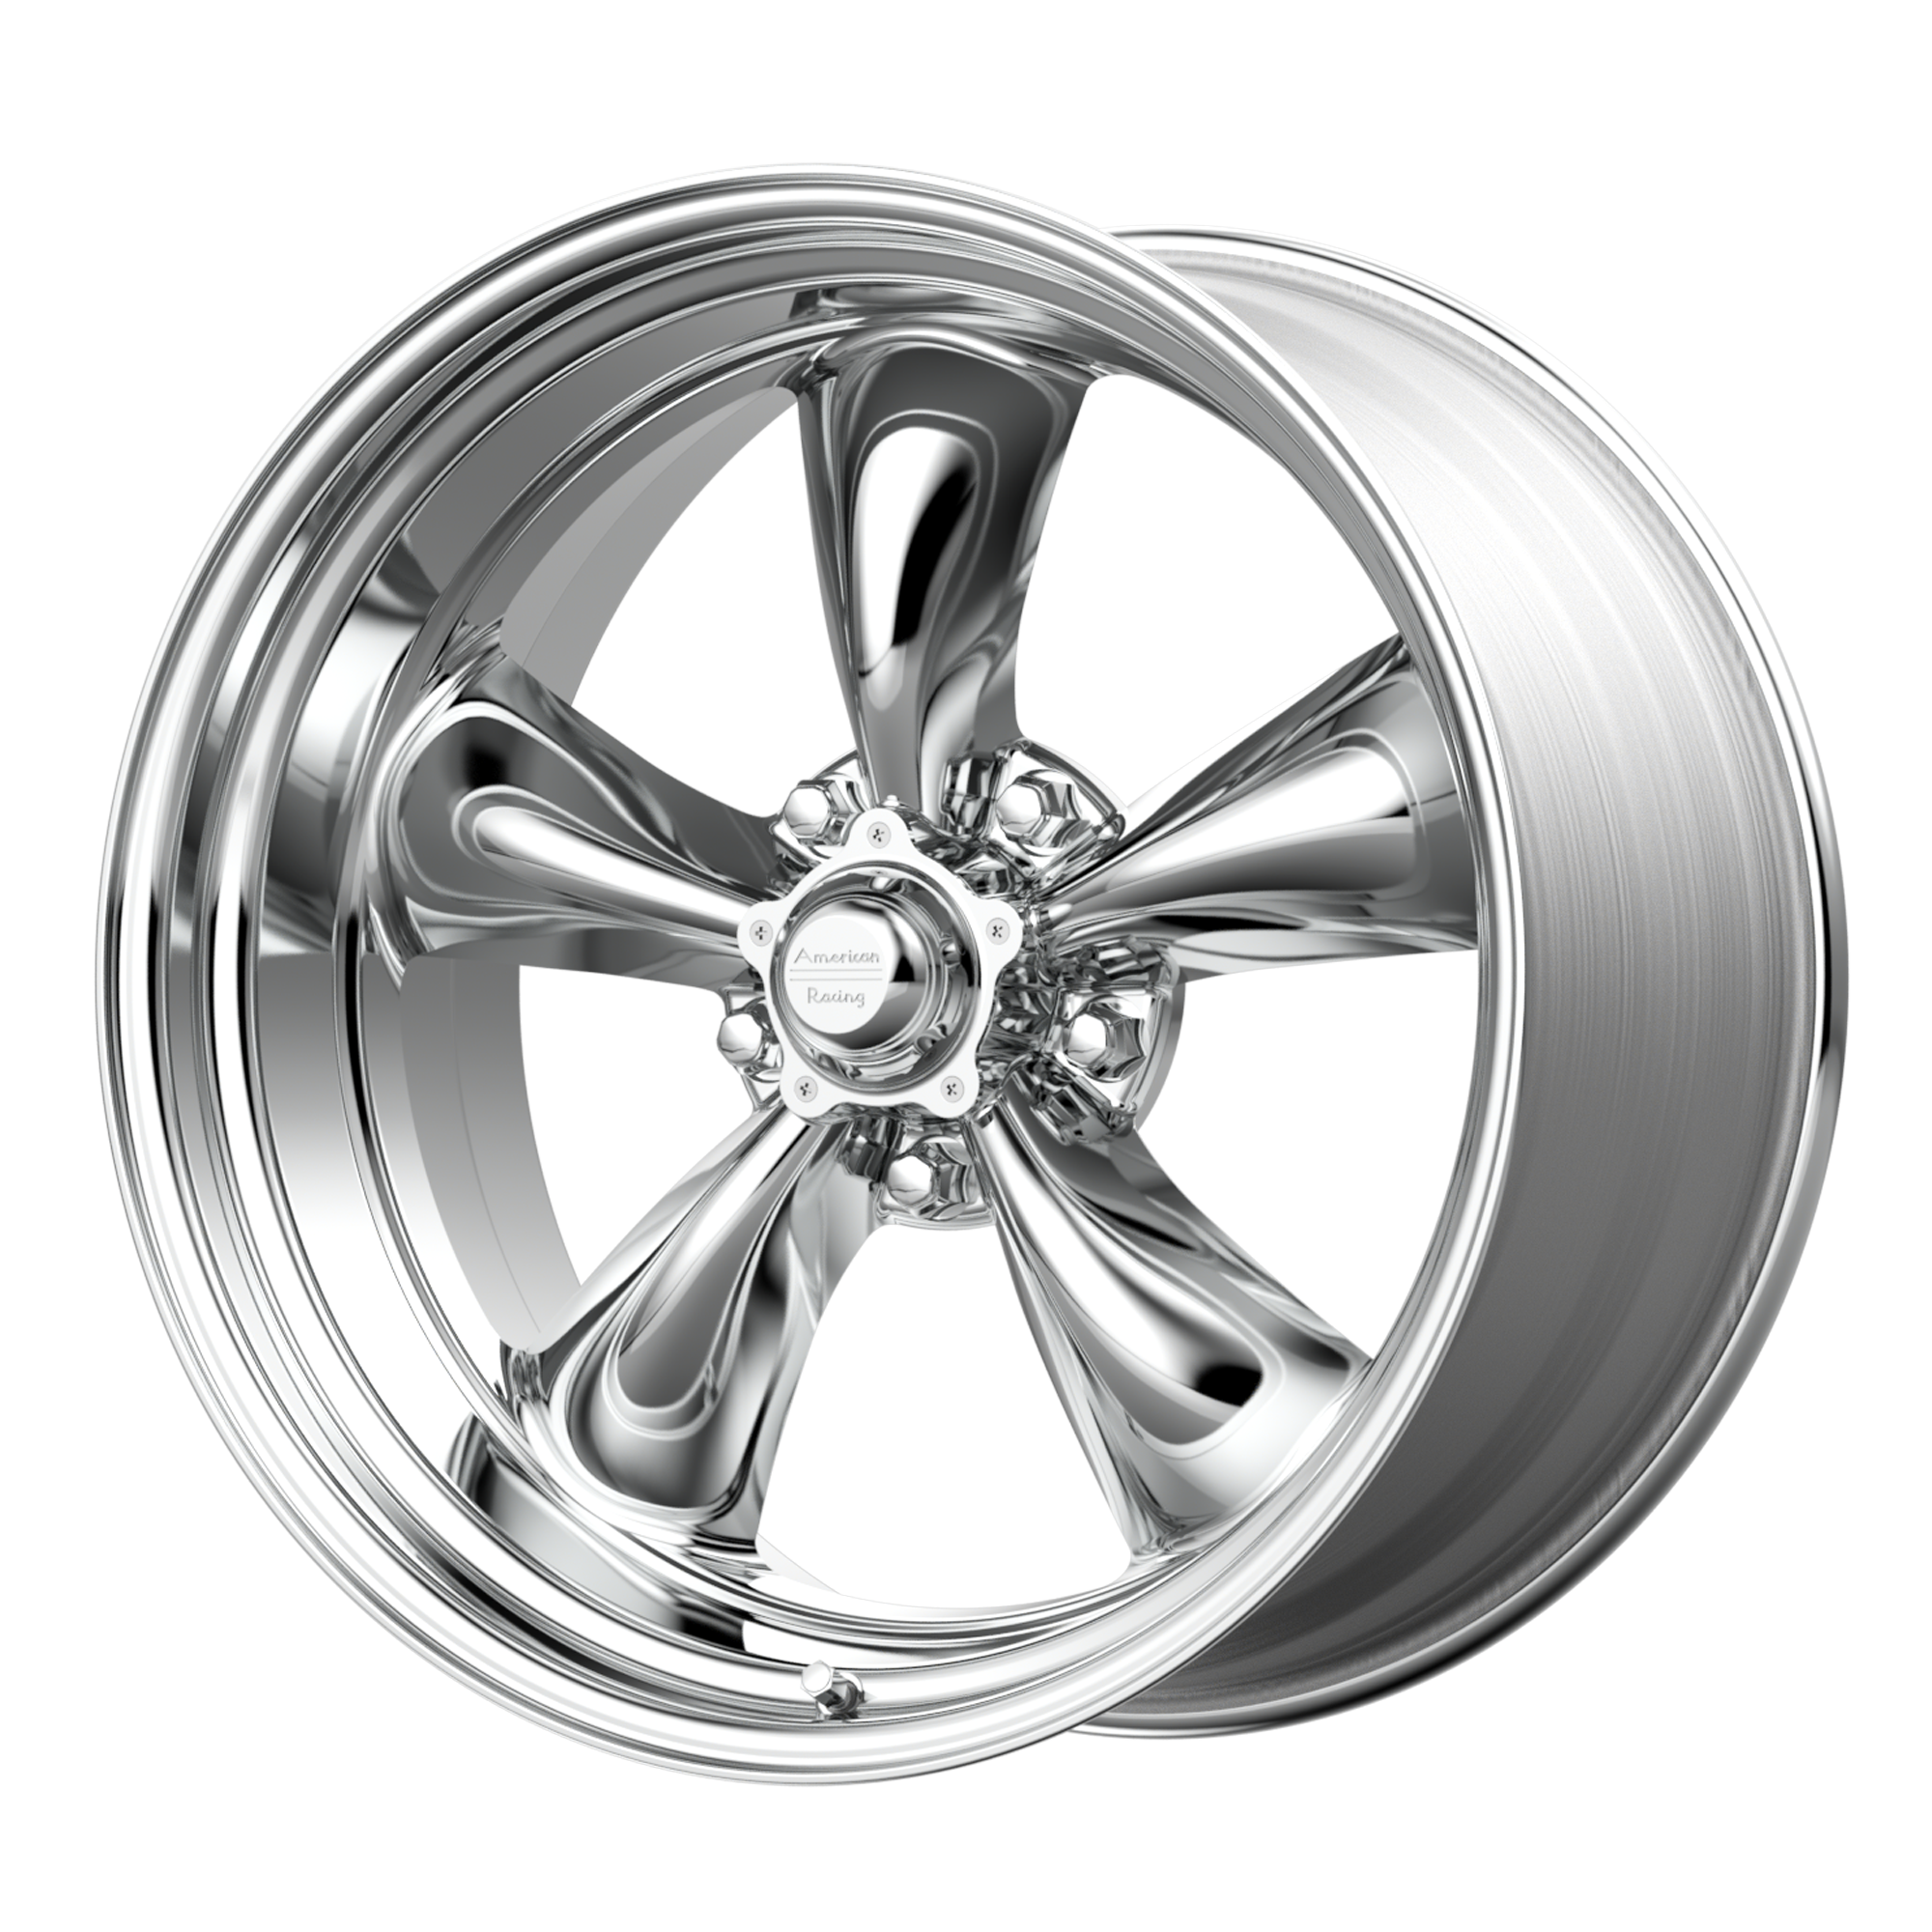 TORQ THRUST II 1 PC 15x7 5x114.30 POLISHED (-6 mm) - Tires and Engine Performance